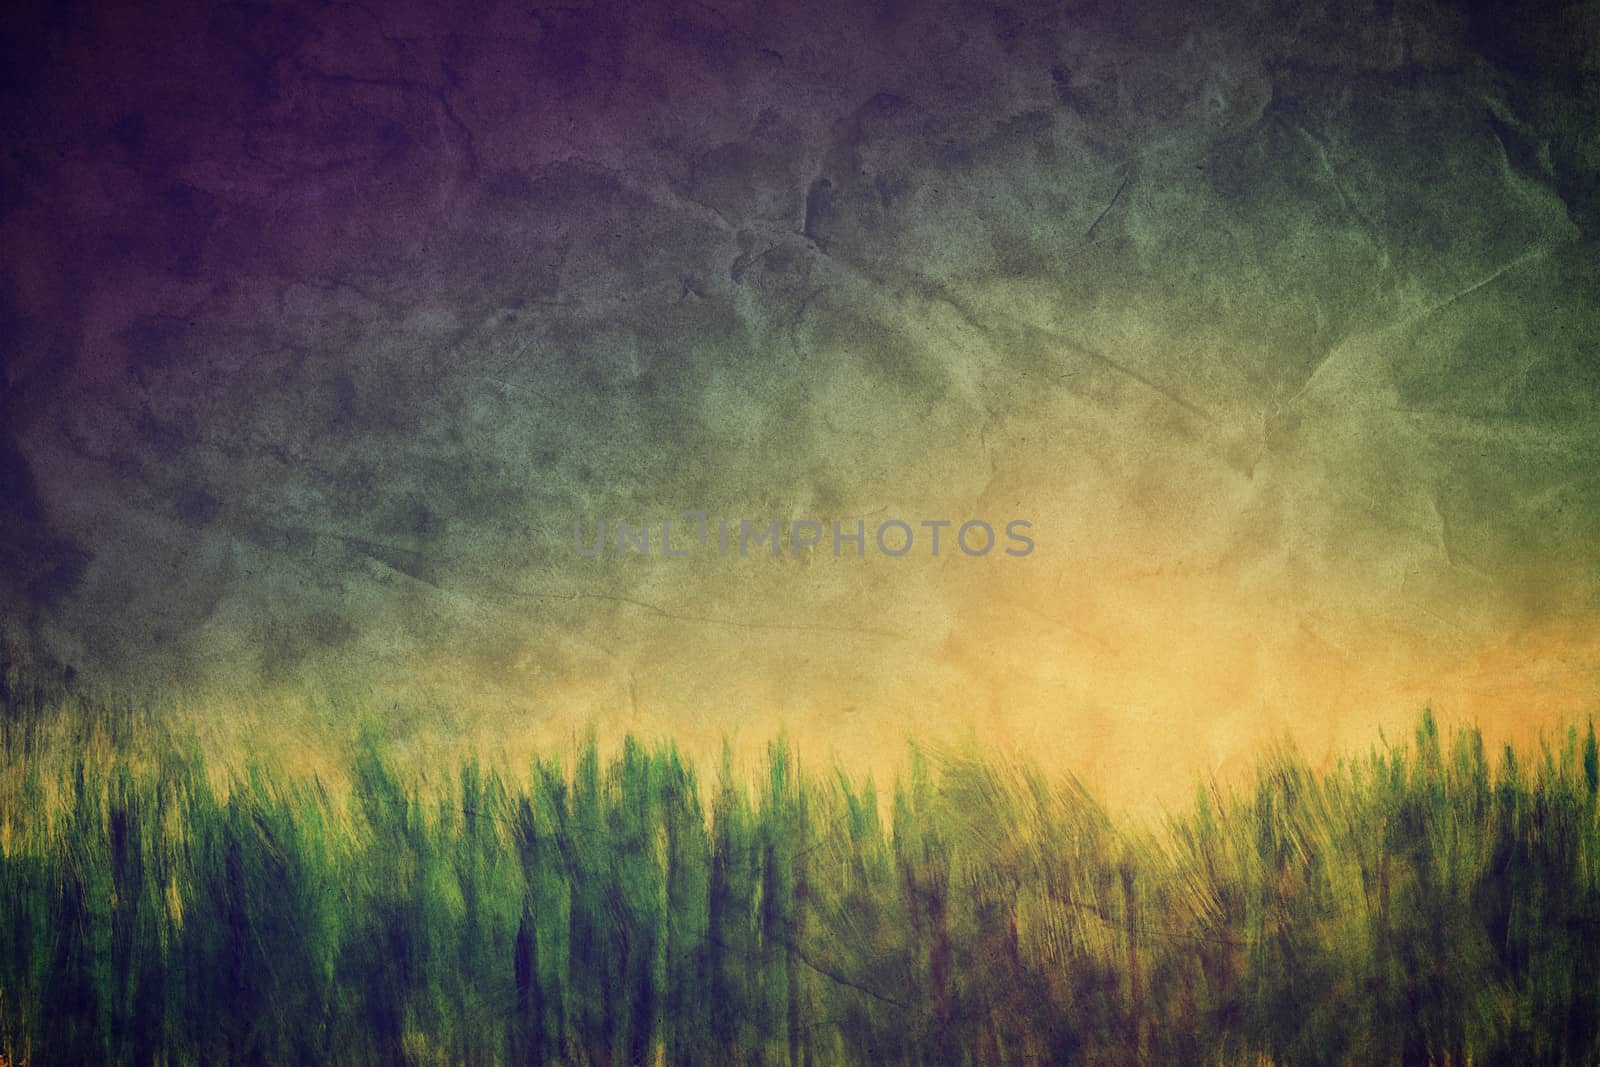 Vintage, retro image of nature landscape with grass and sunny sky. Grunge and creased canvas texture